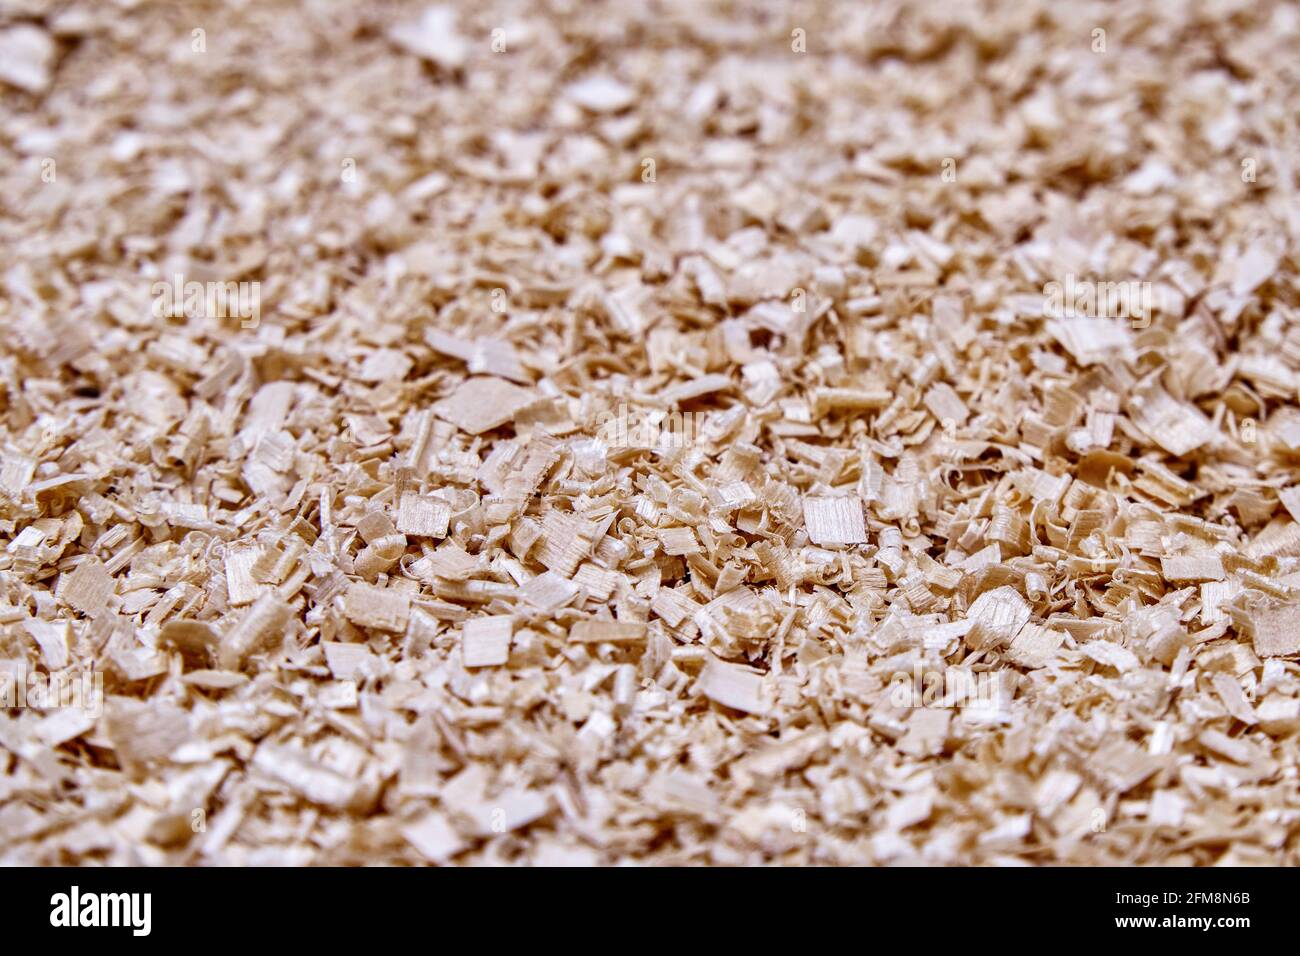 Large pile of beige birch shavings after solid wood processing for furniture production as background extreme close upper view Stock Photo